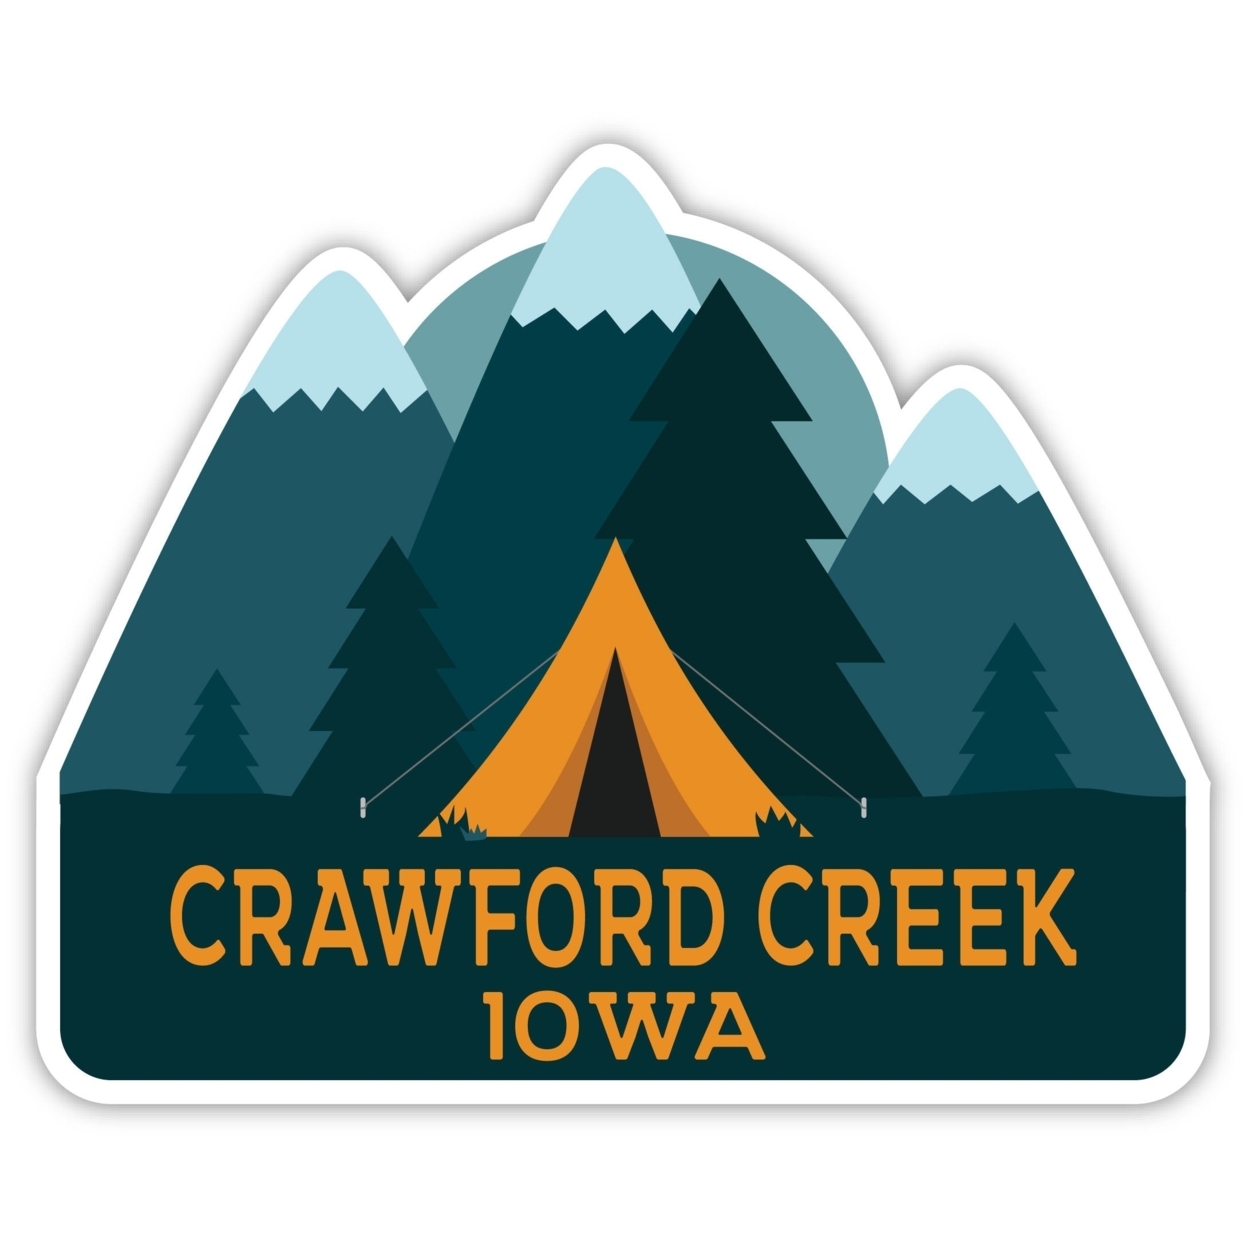 Crawford Creek Iowa Souvenir Decorative Stickers (Choose Theme And Size) - 4-Pack, 2-Inch, Tent